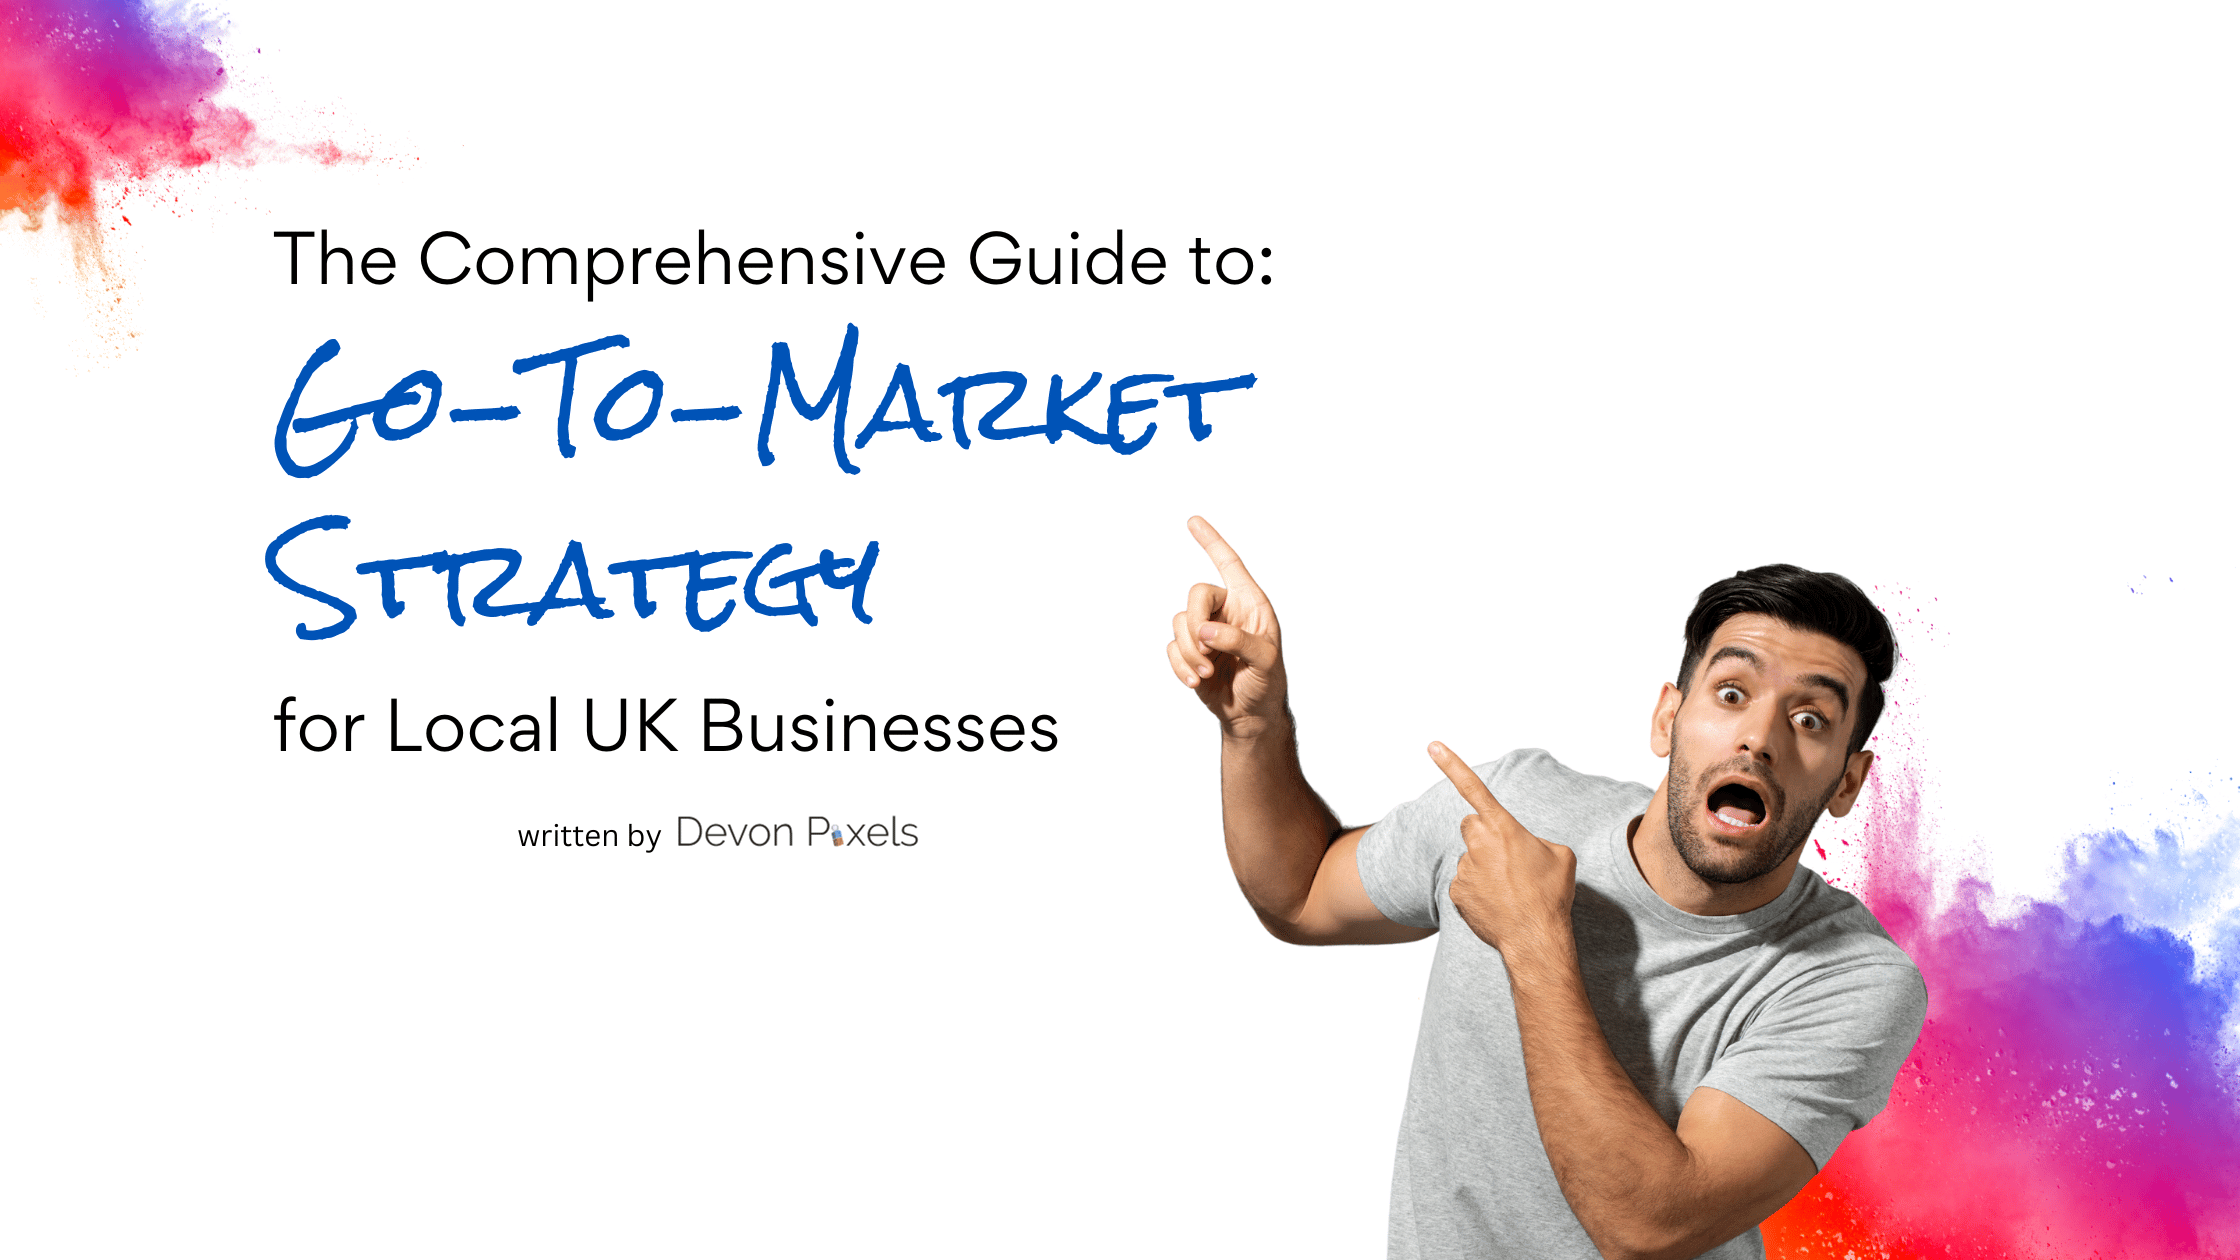 The Comprehensive Guide to Go-To-Market Strategy for Local UK Businesses